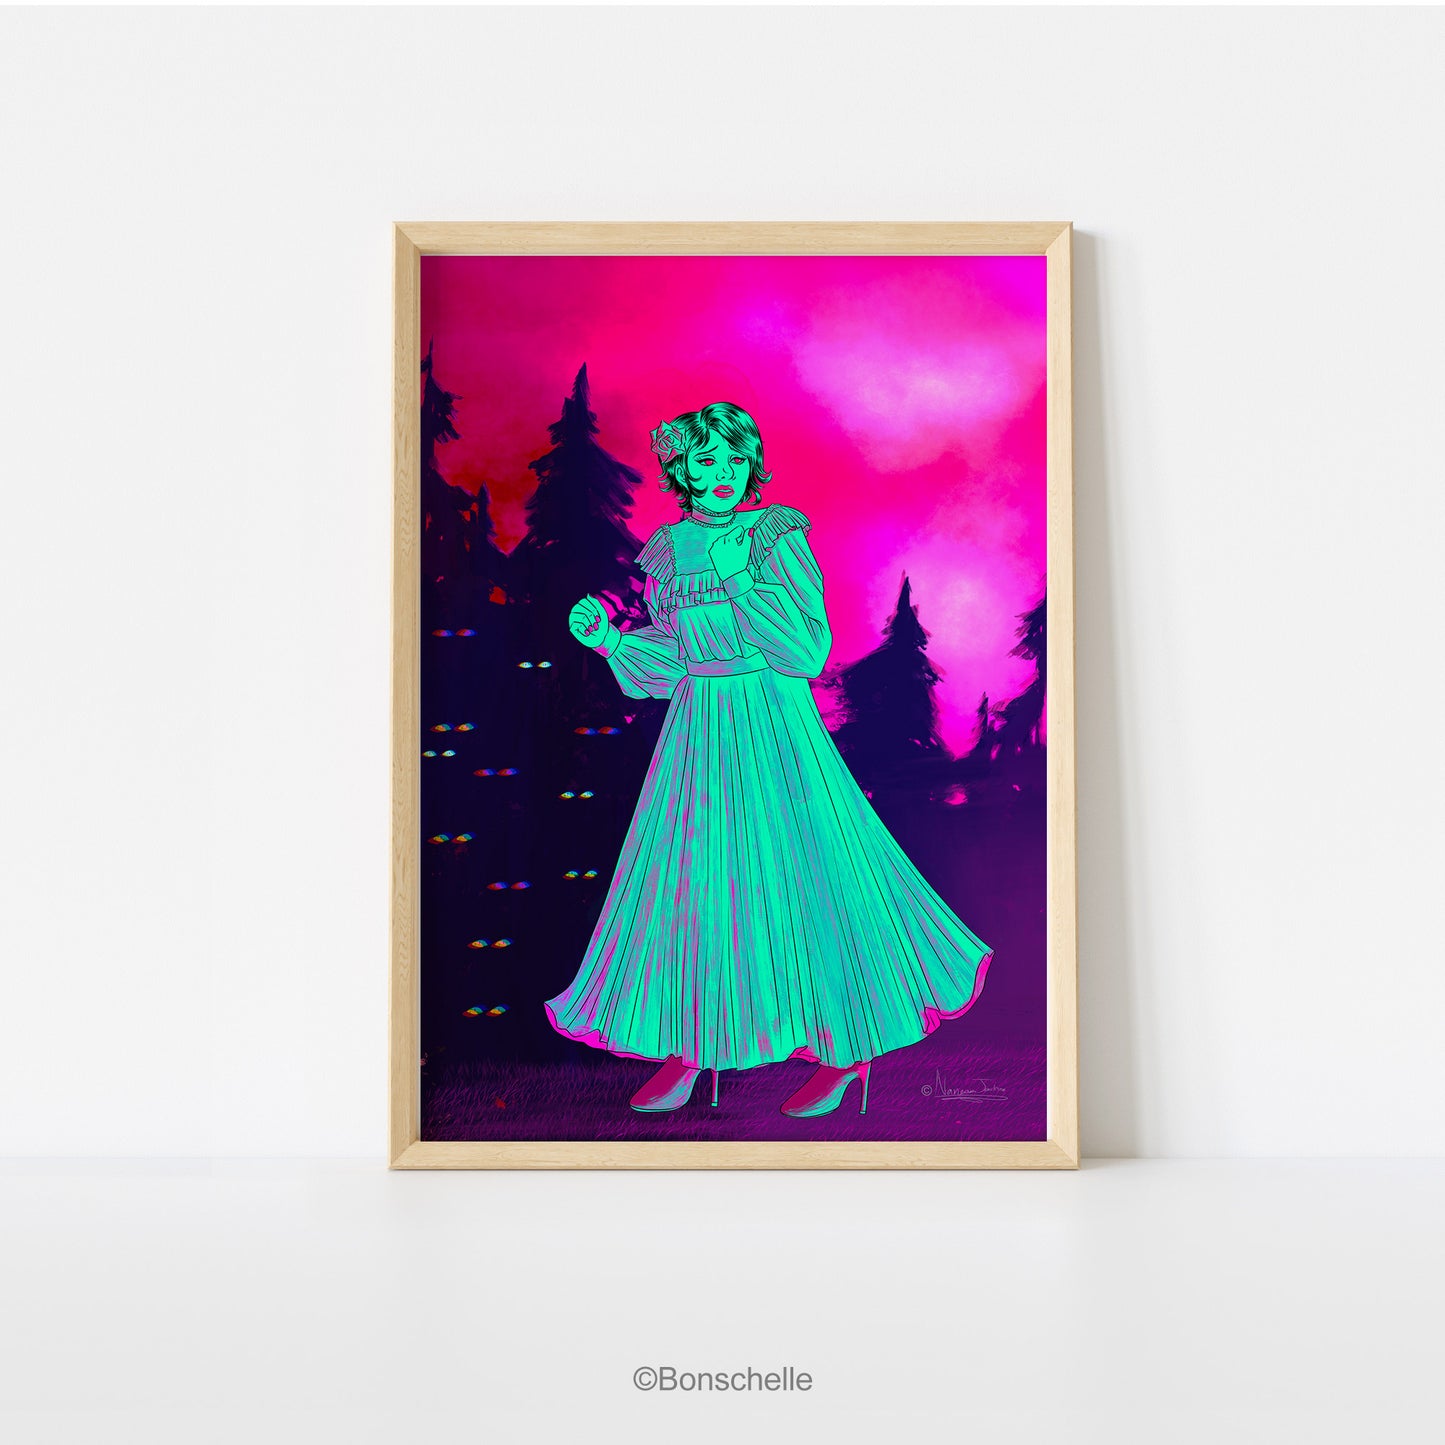 Maiden Lost In The Woods Neon Gothic Digital Art Poster Print shwon framed leaning against a wall